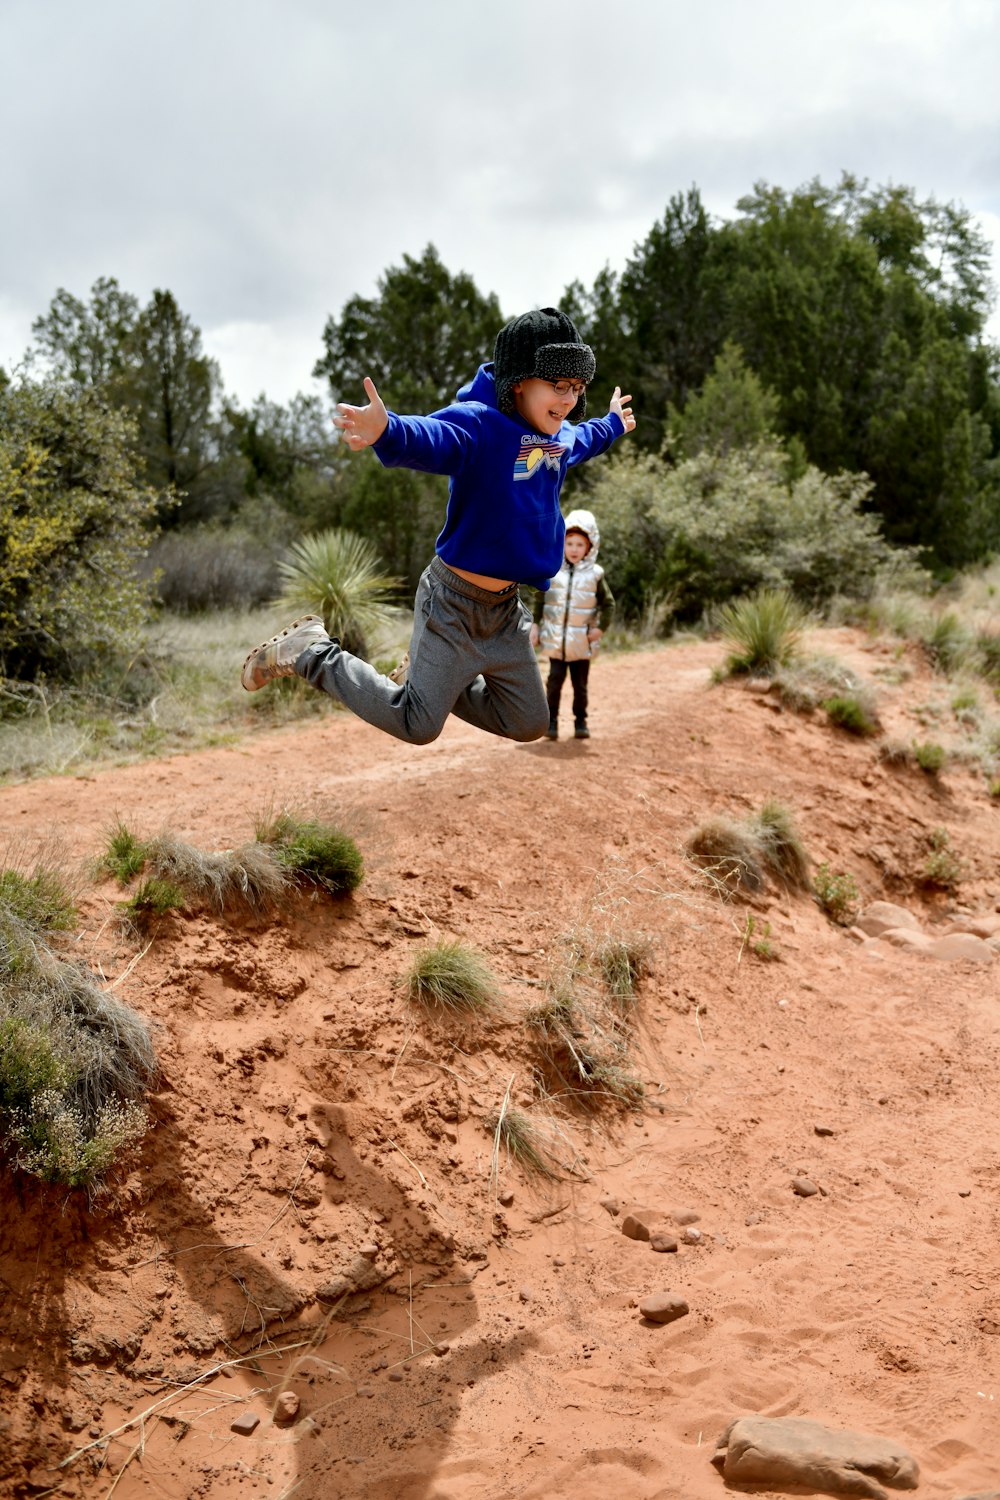 a person jumping in the air on a dirt hill